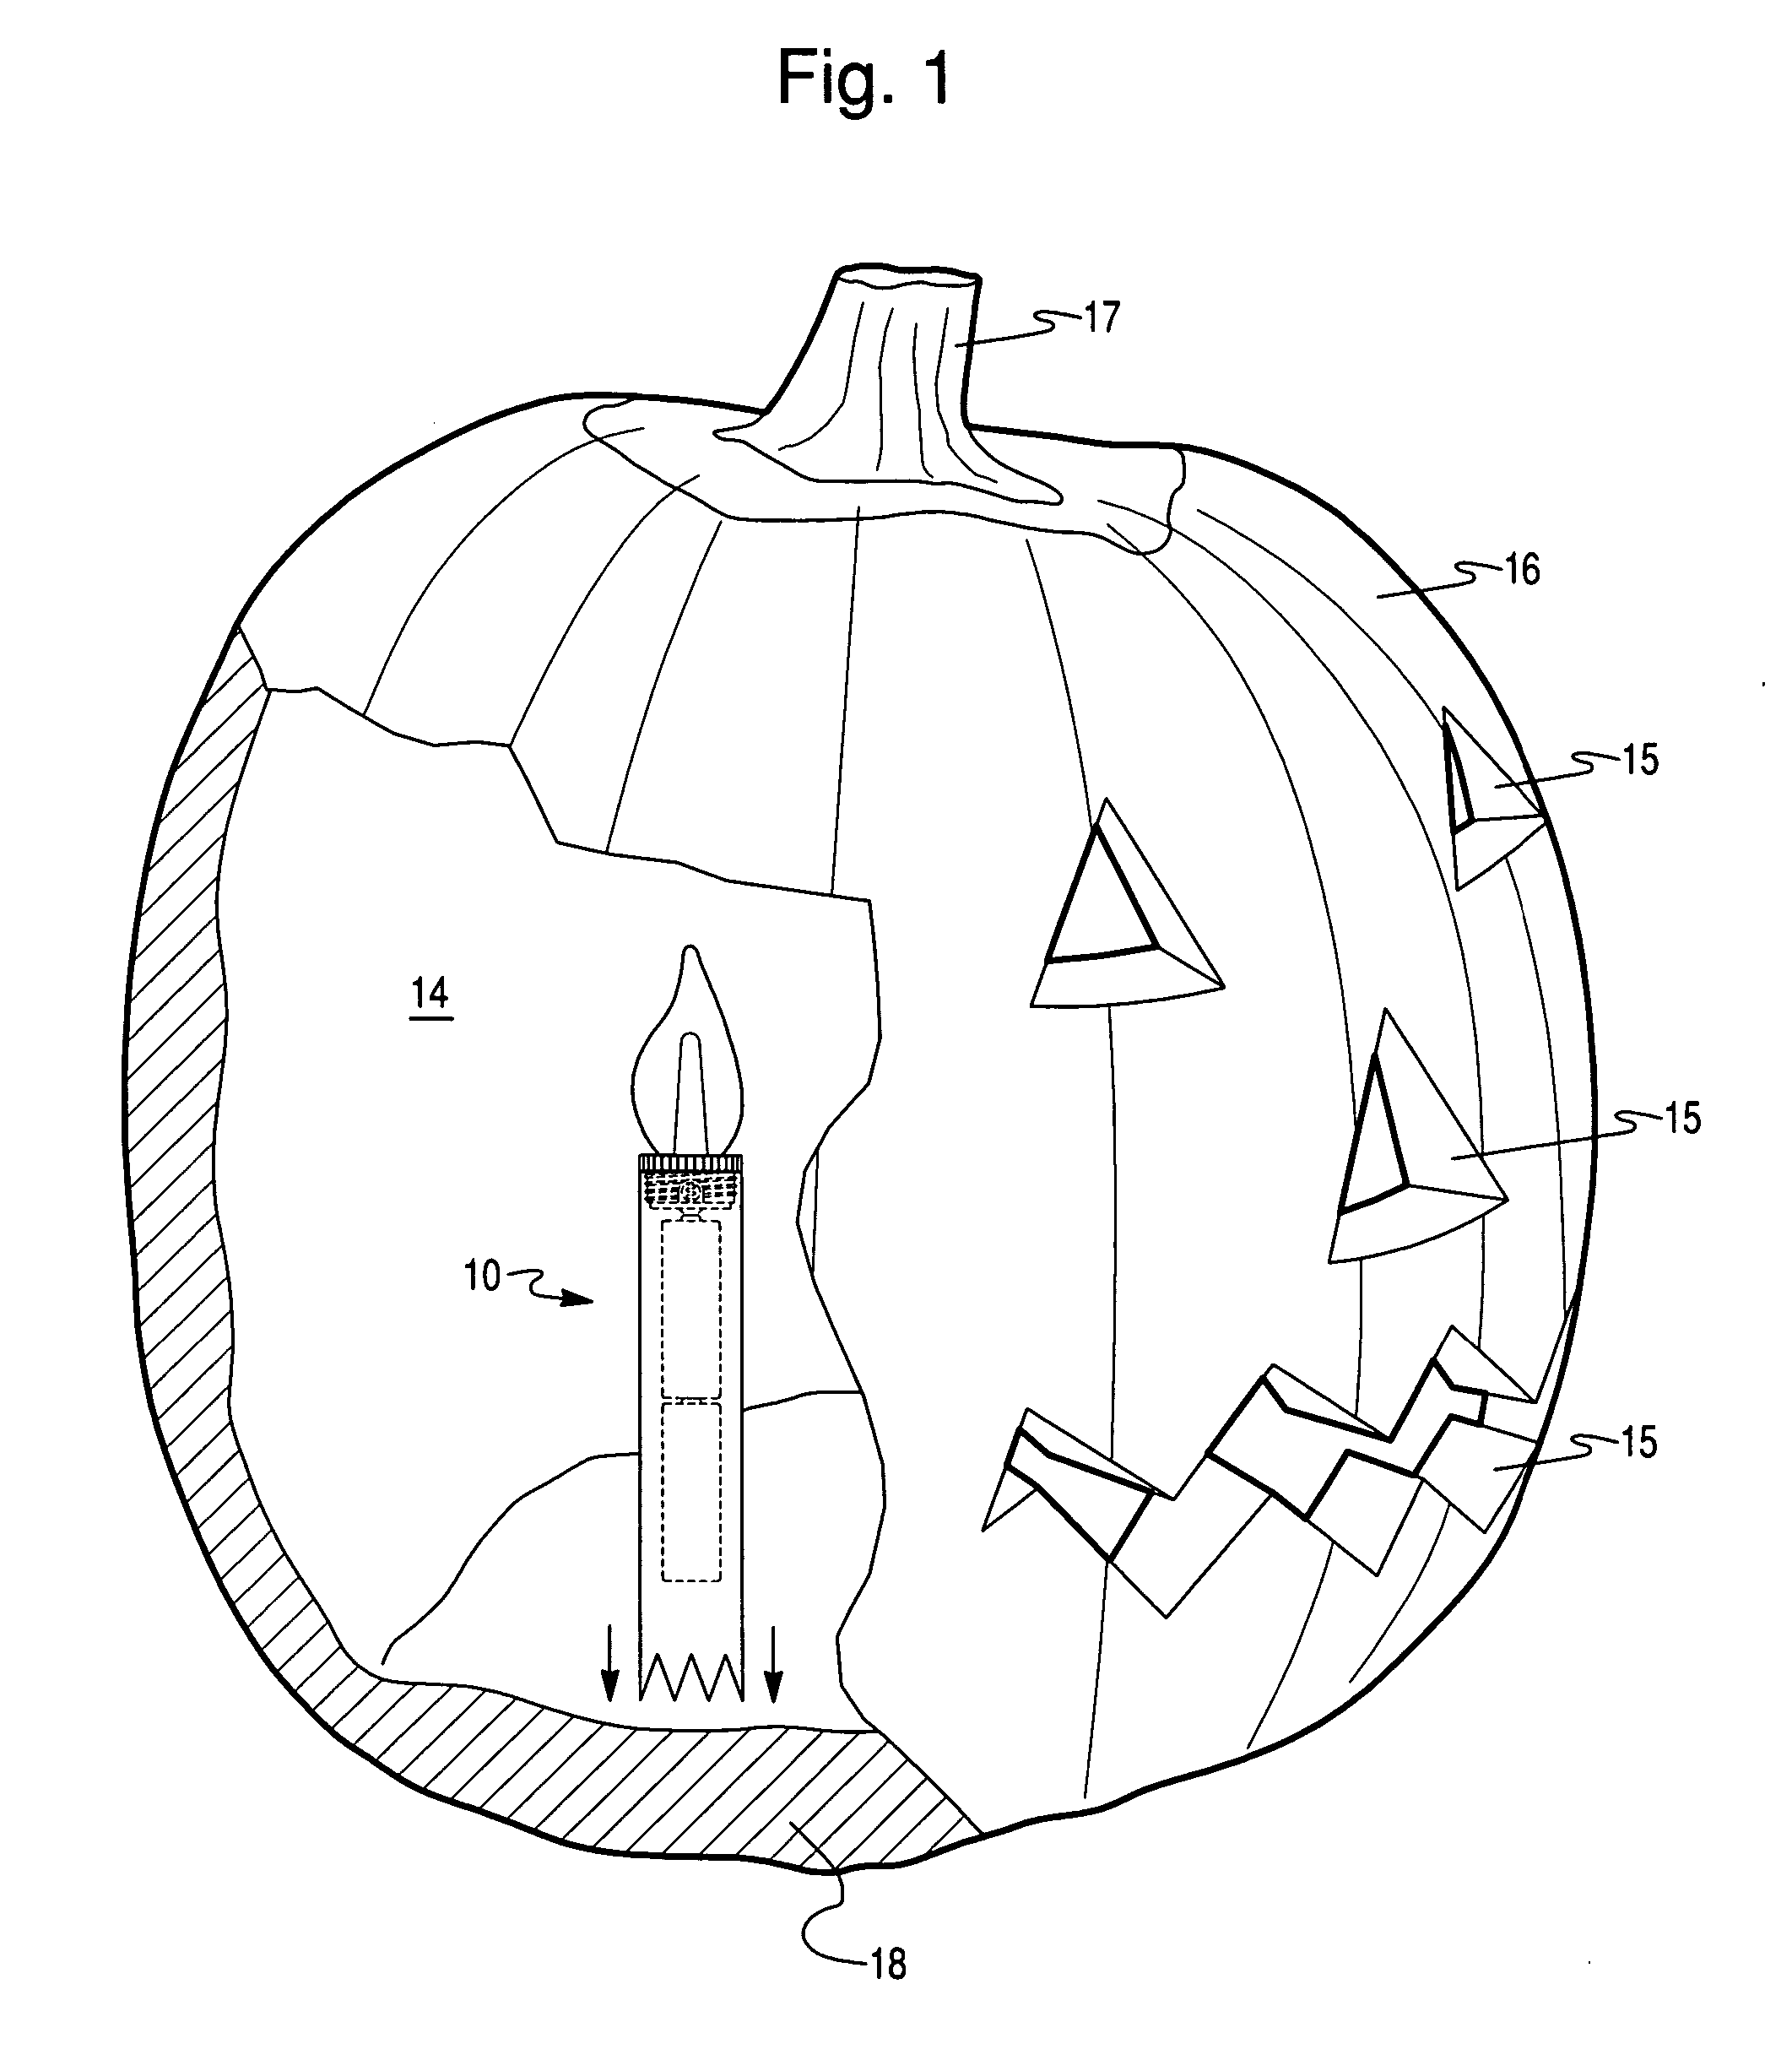 Lighting device for pumpkins and other similar articles